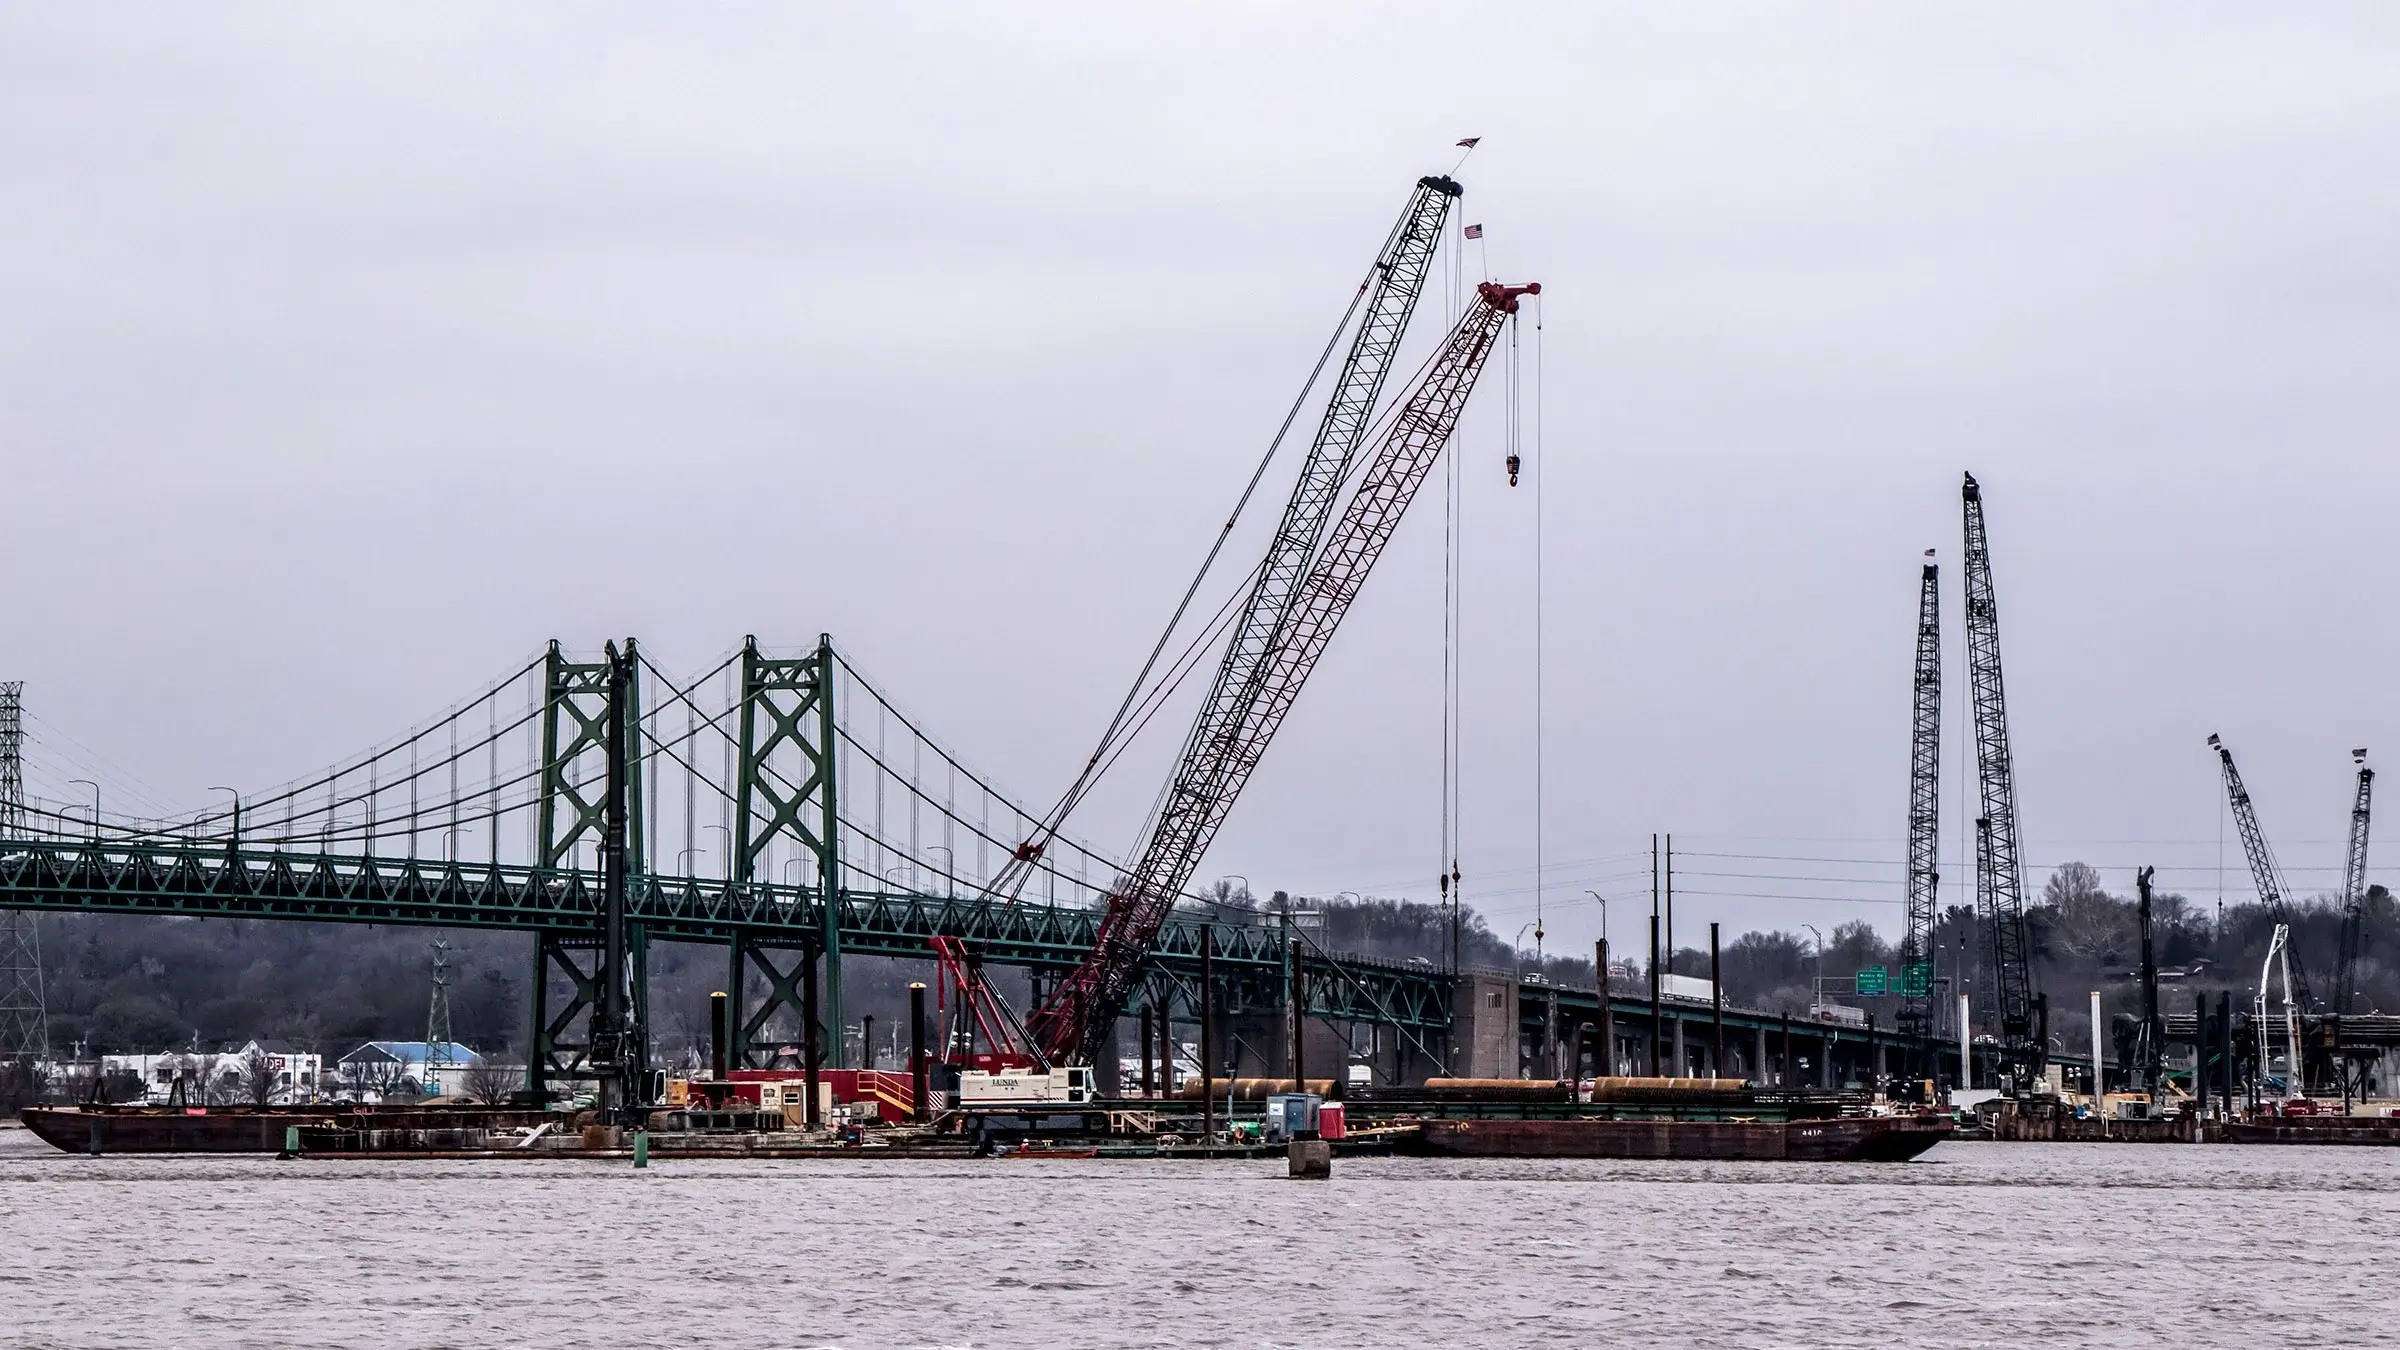 Cranes performing work on large bridge over a river.